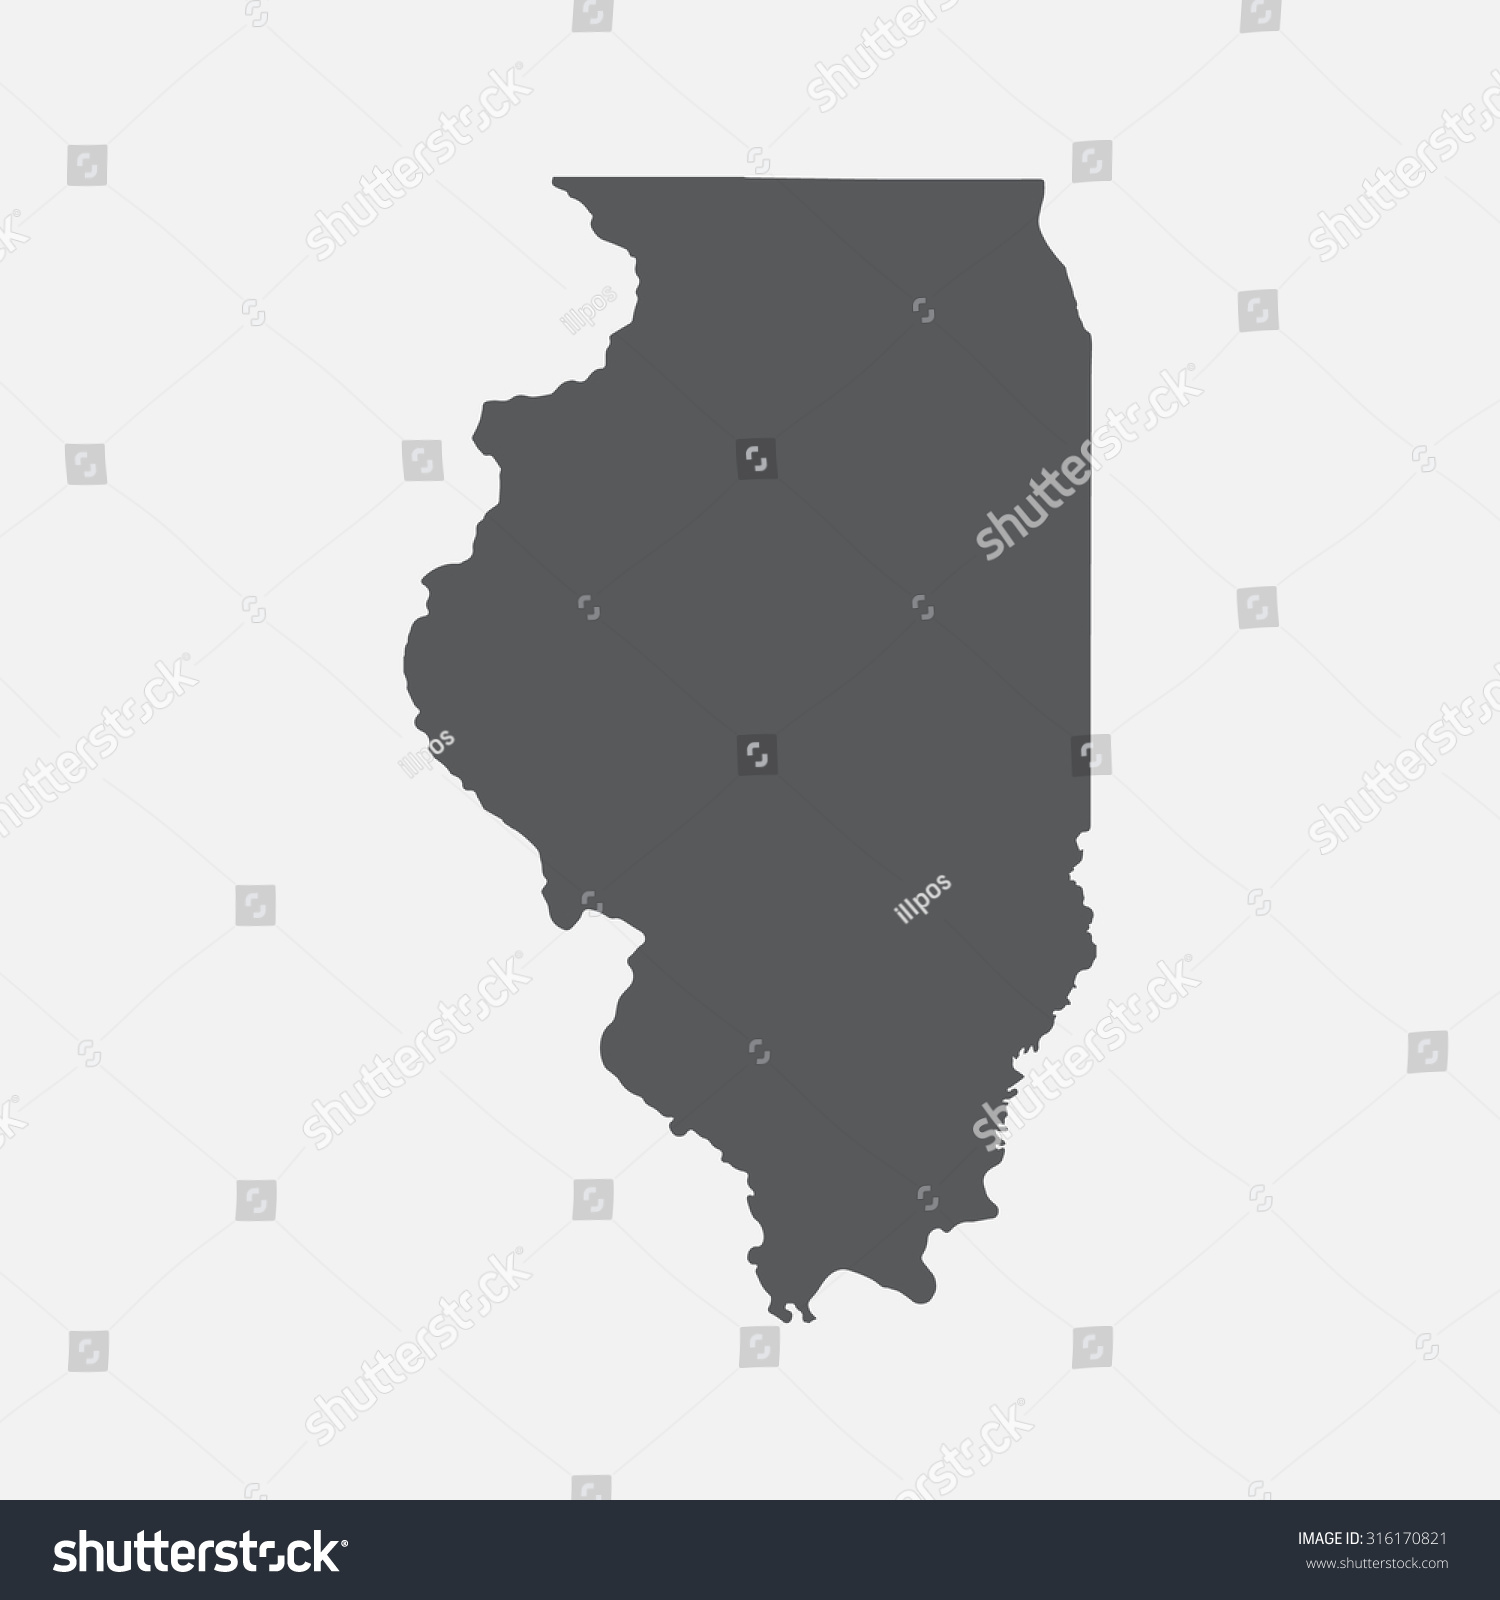 SVG of Illinois grey state border map. svg